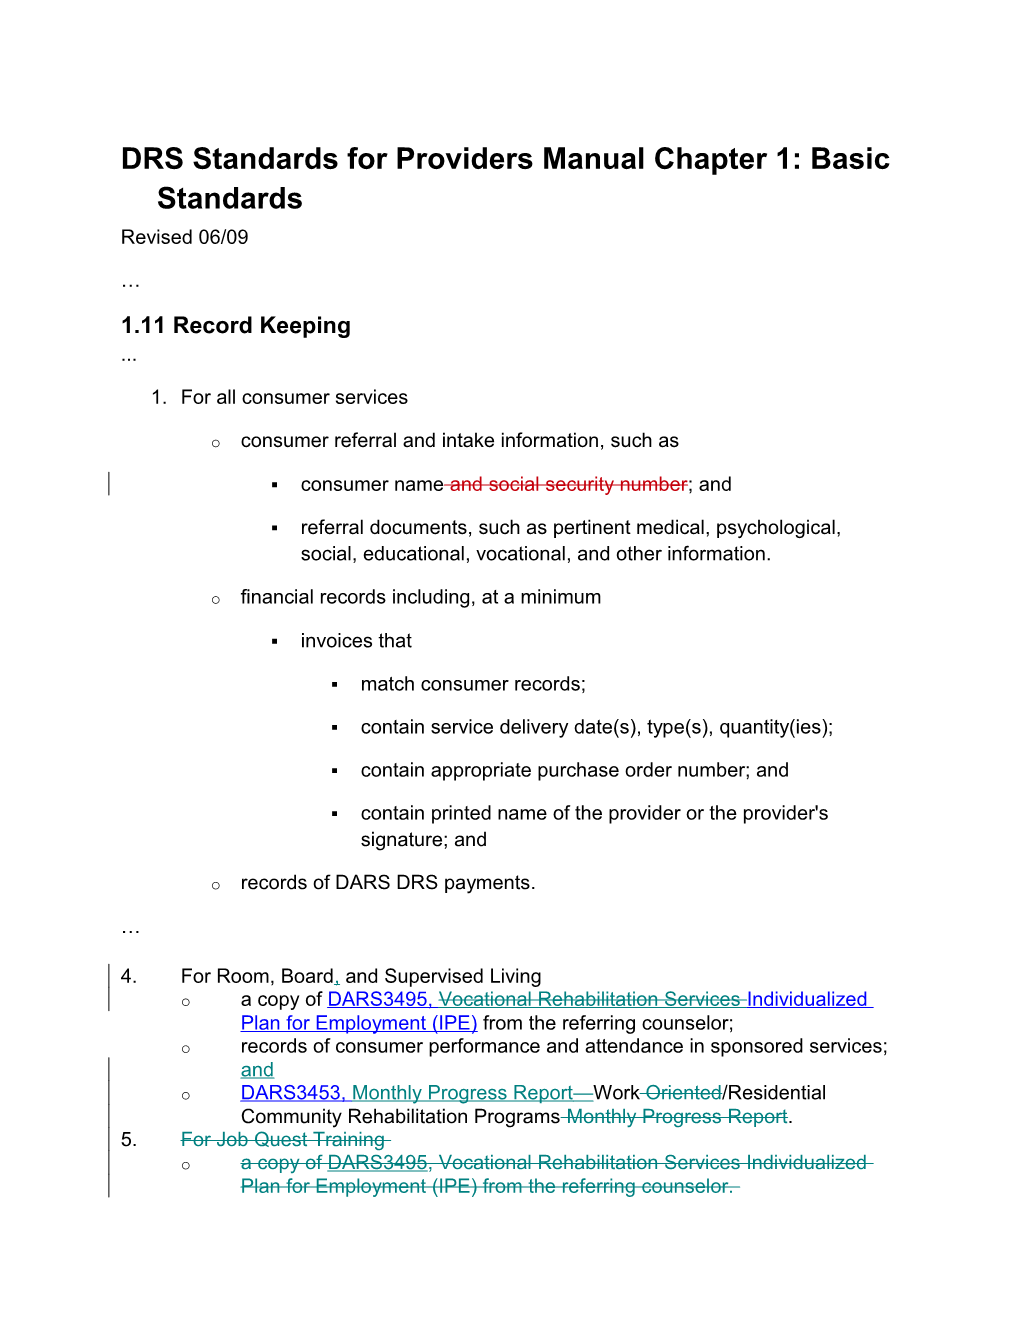 DRS Standards for Providers Chapter 1 Revisions - June 2009